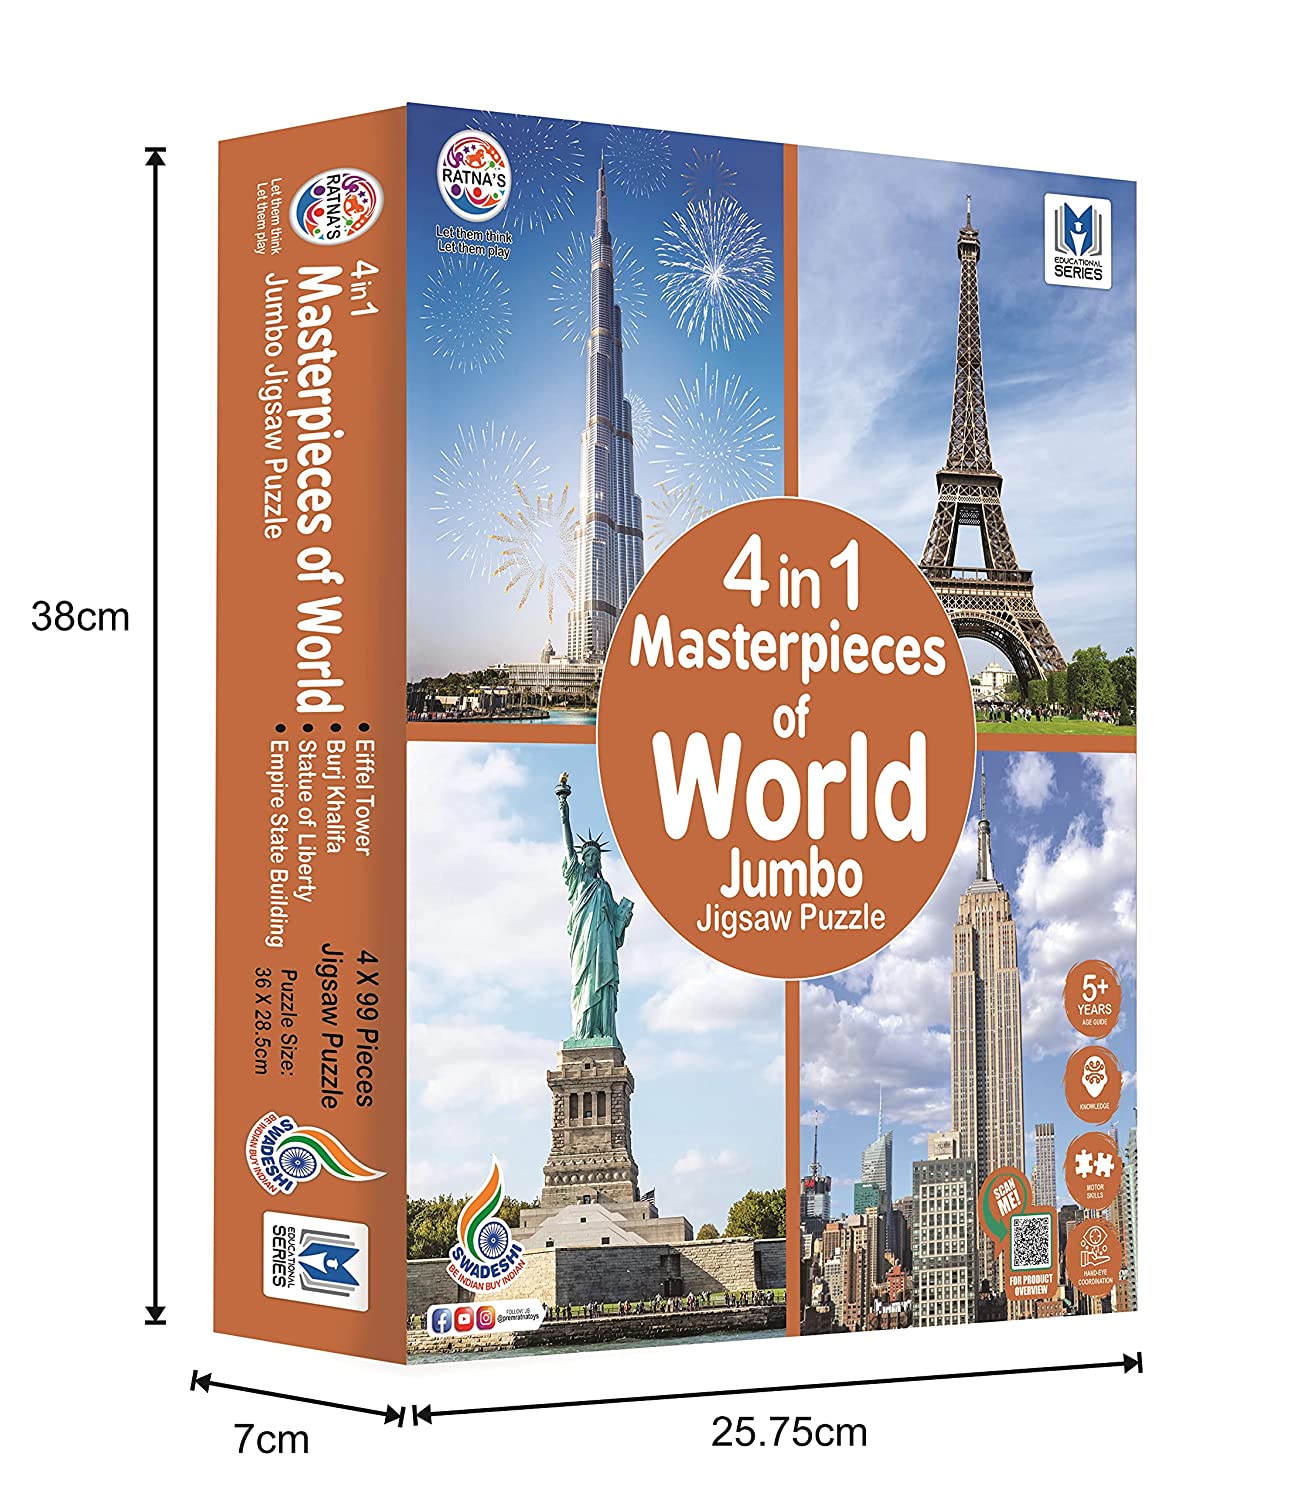 4 in 1 Master Pieces of World Jumbo